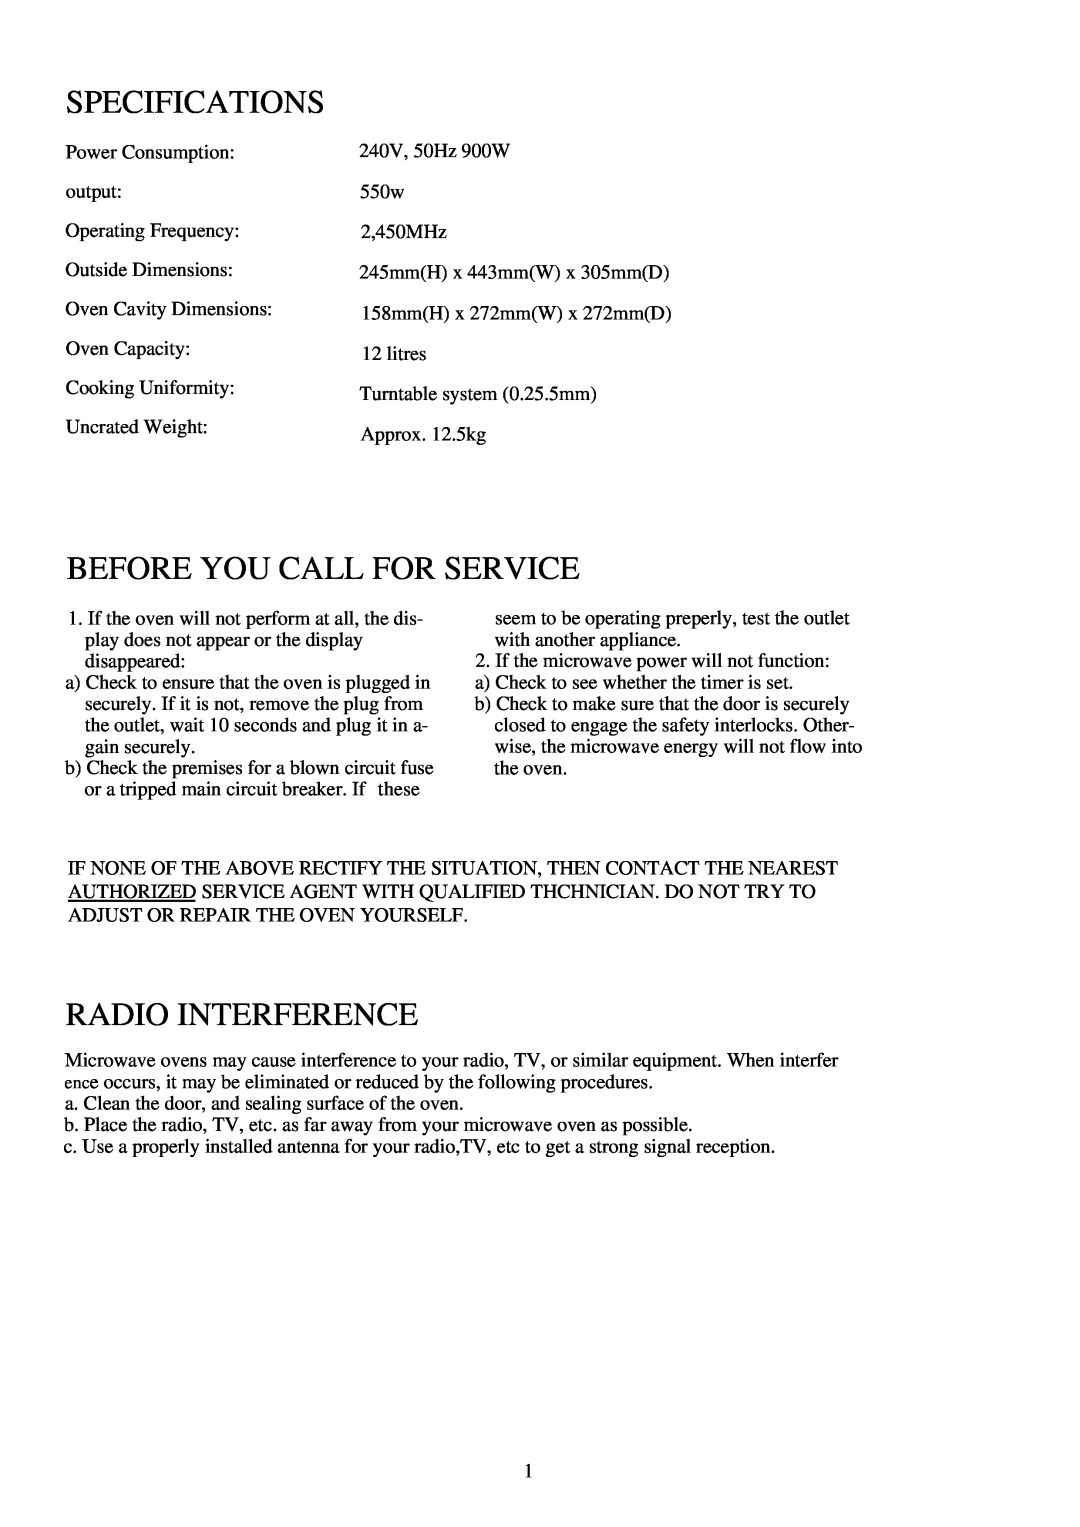 Palsonic PMO-555 owner manual Specifications, Before You Call For Service, Radio Interference 